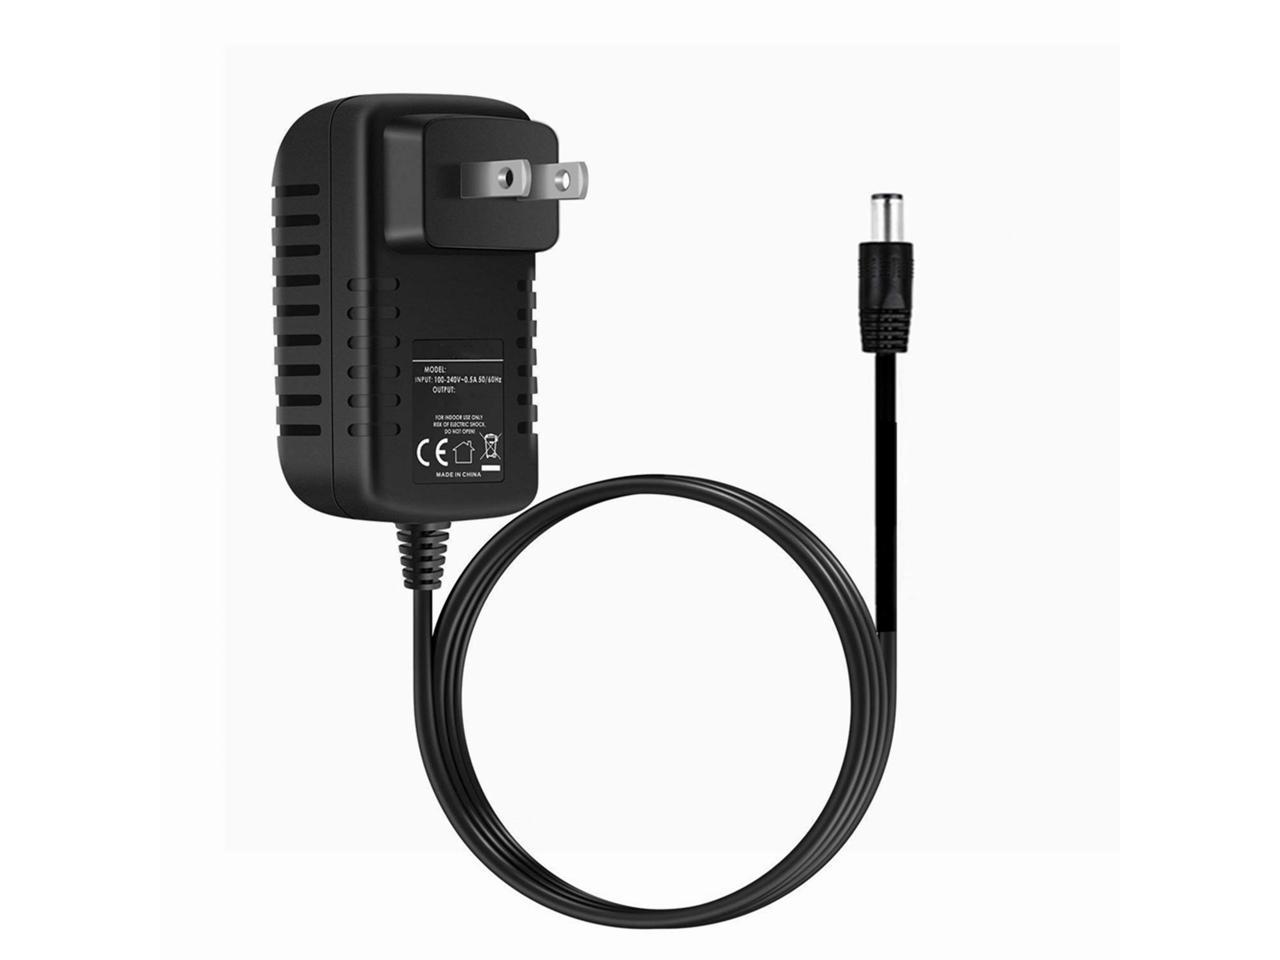 HOME WALL Charger Replacement for Cobra MicroTalk LI7020-2WXEVP 2-Way Radio 